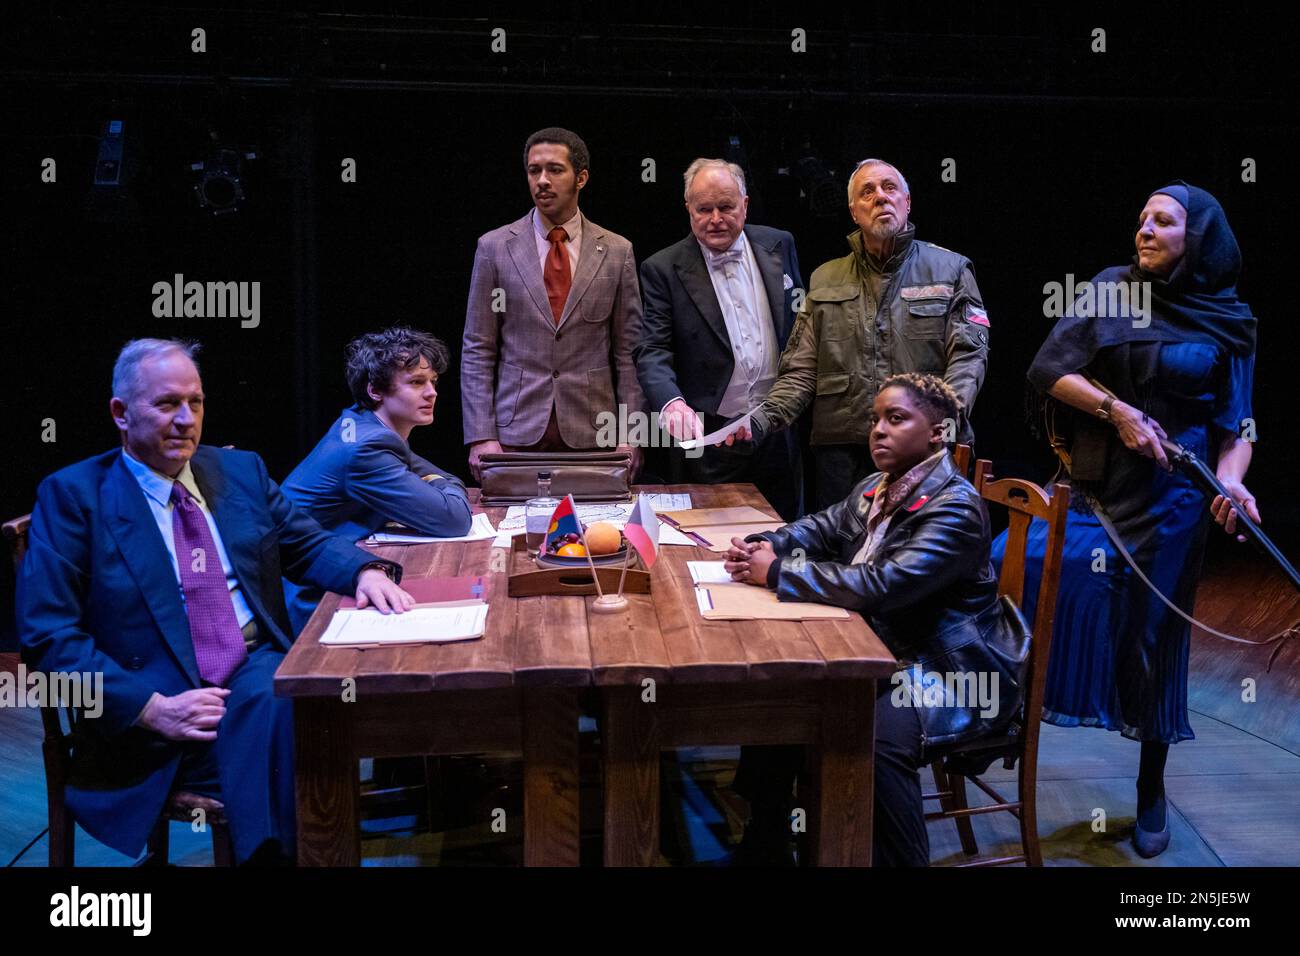 London, UK.  9 February 2023. (L to R) Michael Maloney as Anton Korsakov, Arthur Conti as Young Leitski, Greg Lockett as Tyler, Clive Anderson as (Old) Hugo Leitski,  Barrie Rutter as General Volvisch Gromski, Winnie Arhin as Rozhina Flintok and Nichola McAuliffe as Vaslika Krenskaya at a photocall of ‘Winner’s Curse’ at Park Theatre in Finsbury Park.  Directed by Jez Bond, AD for Park Theatre, and written by former ambassador and Middle East peace negotiator Daniel Taub with Dan Patterson, performances run 8 February to 11 March 2023.  Credit: Stephen Chung / Alamy Live News Stock Photo